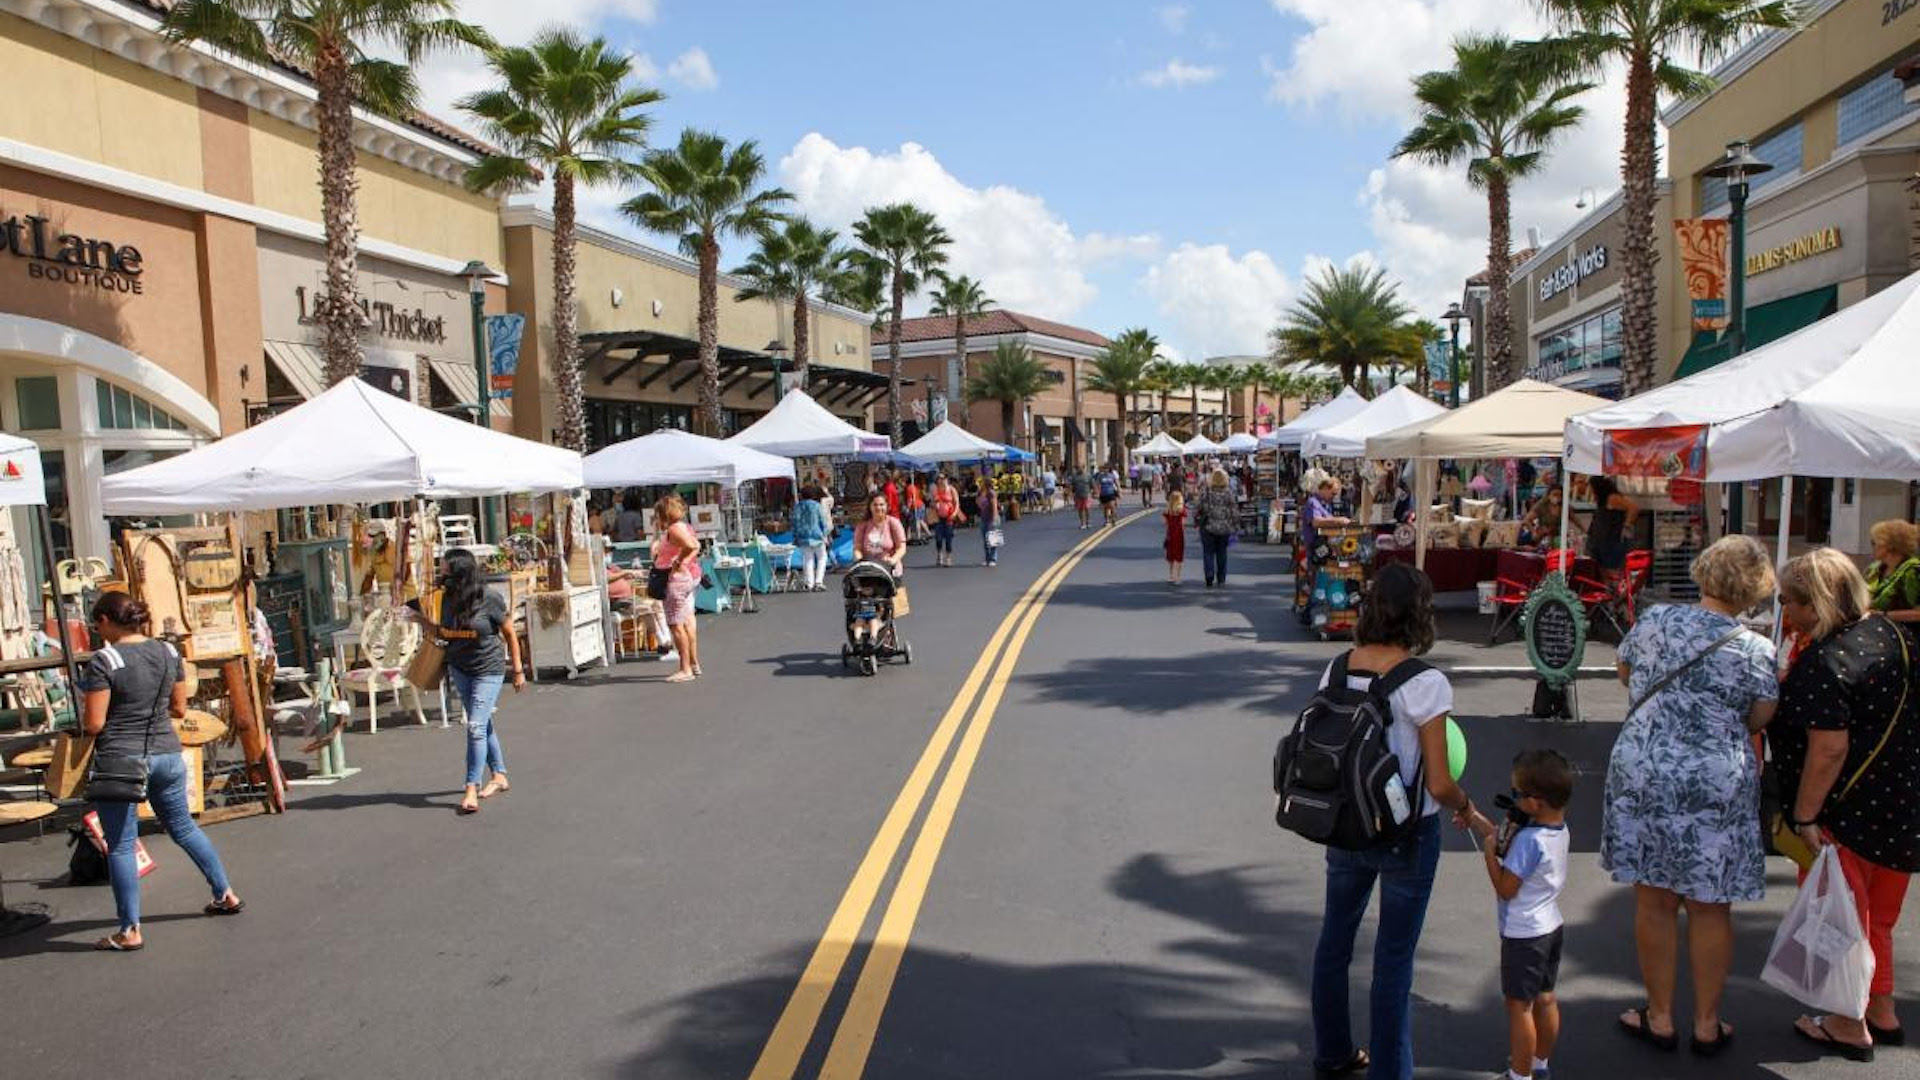 New monthly market featuring 40+ Tampa Bay vendors launching at Shops